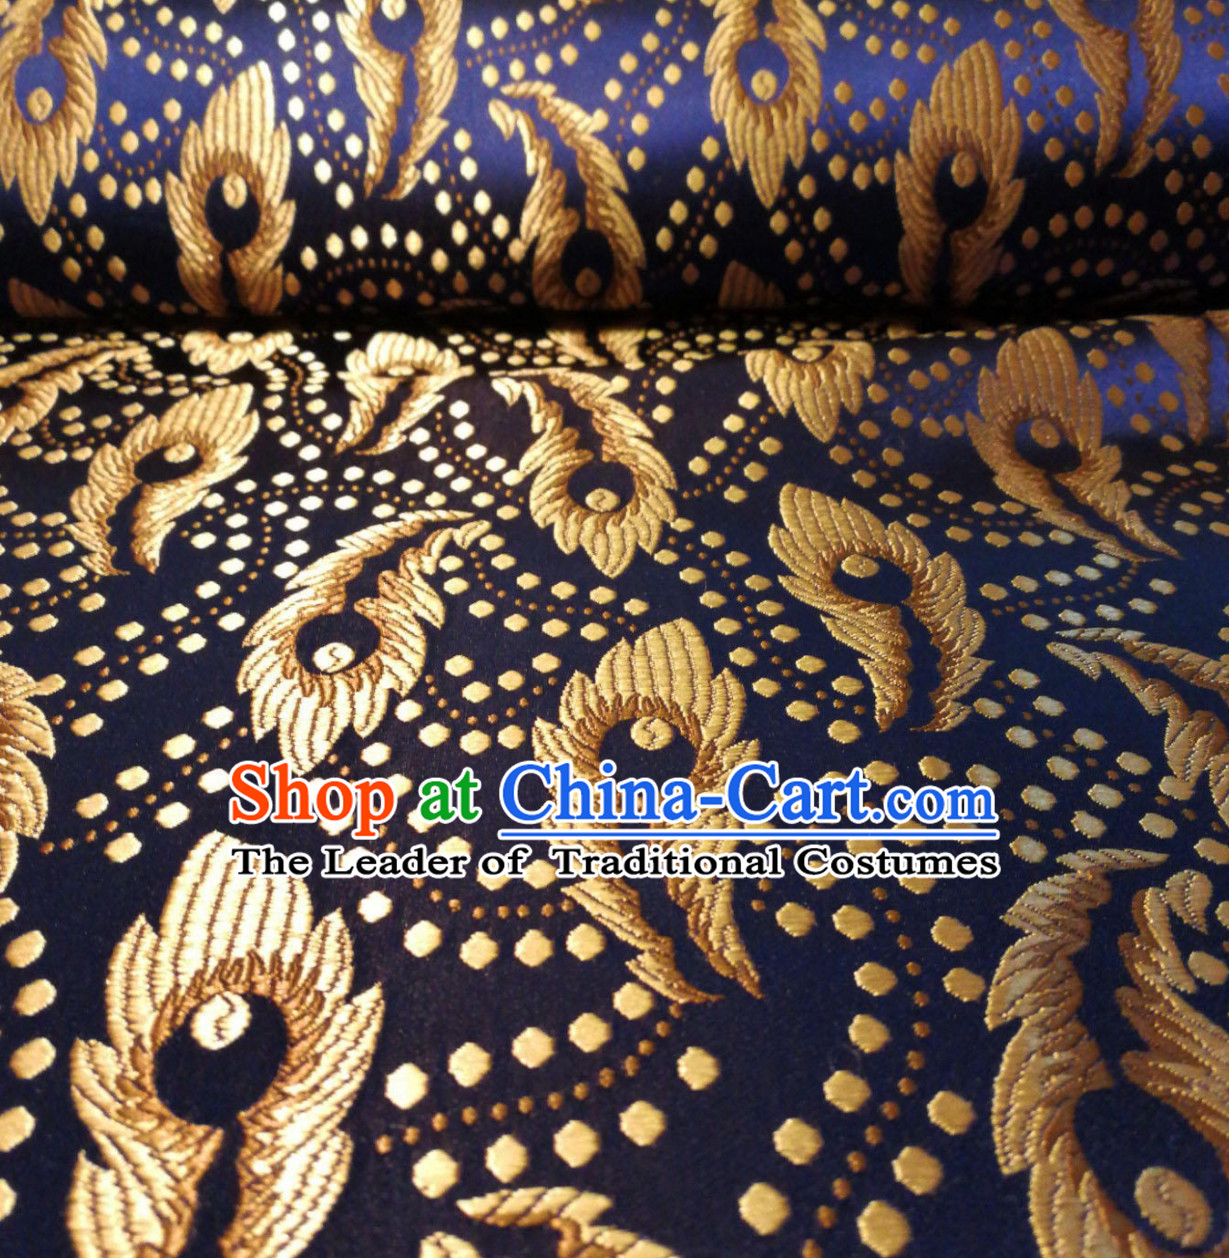 Royal Blue Color Chinese Royal Palace Style Traditional Pattern Design Brocade Fabric Silk Fabric Chinese Fabric Asian Material